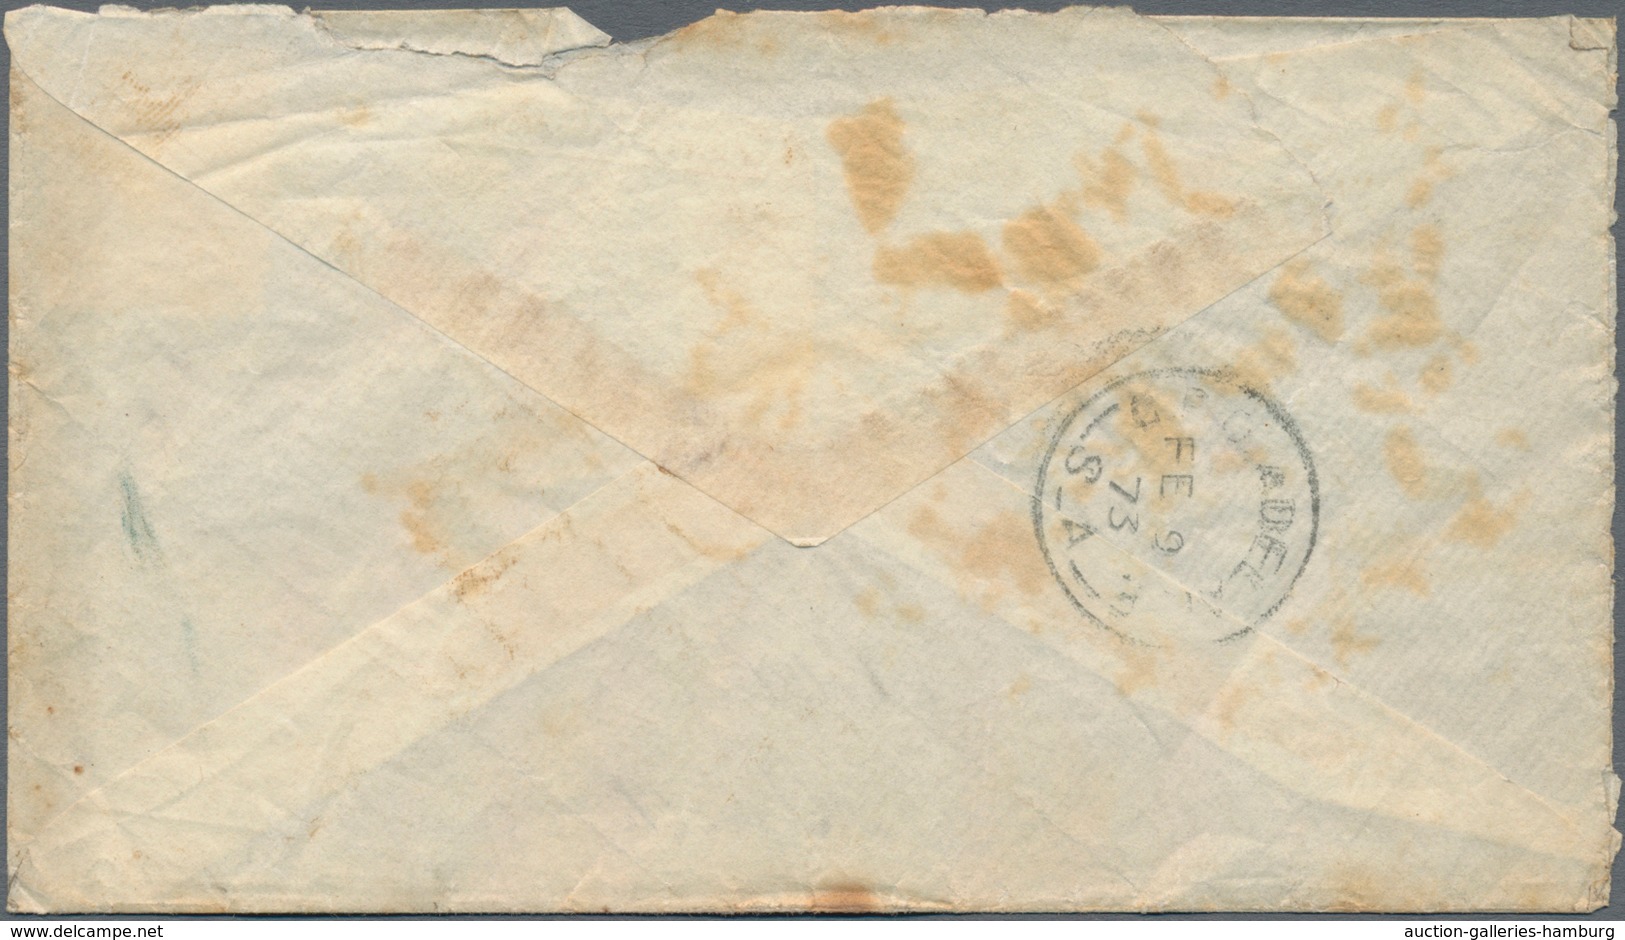 Südaustralien: 1872, Letter Franked With 2 DQV Orange Red With Numeral Cancellation "181" "NORTHERN - Lettres & Documents